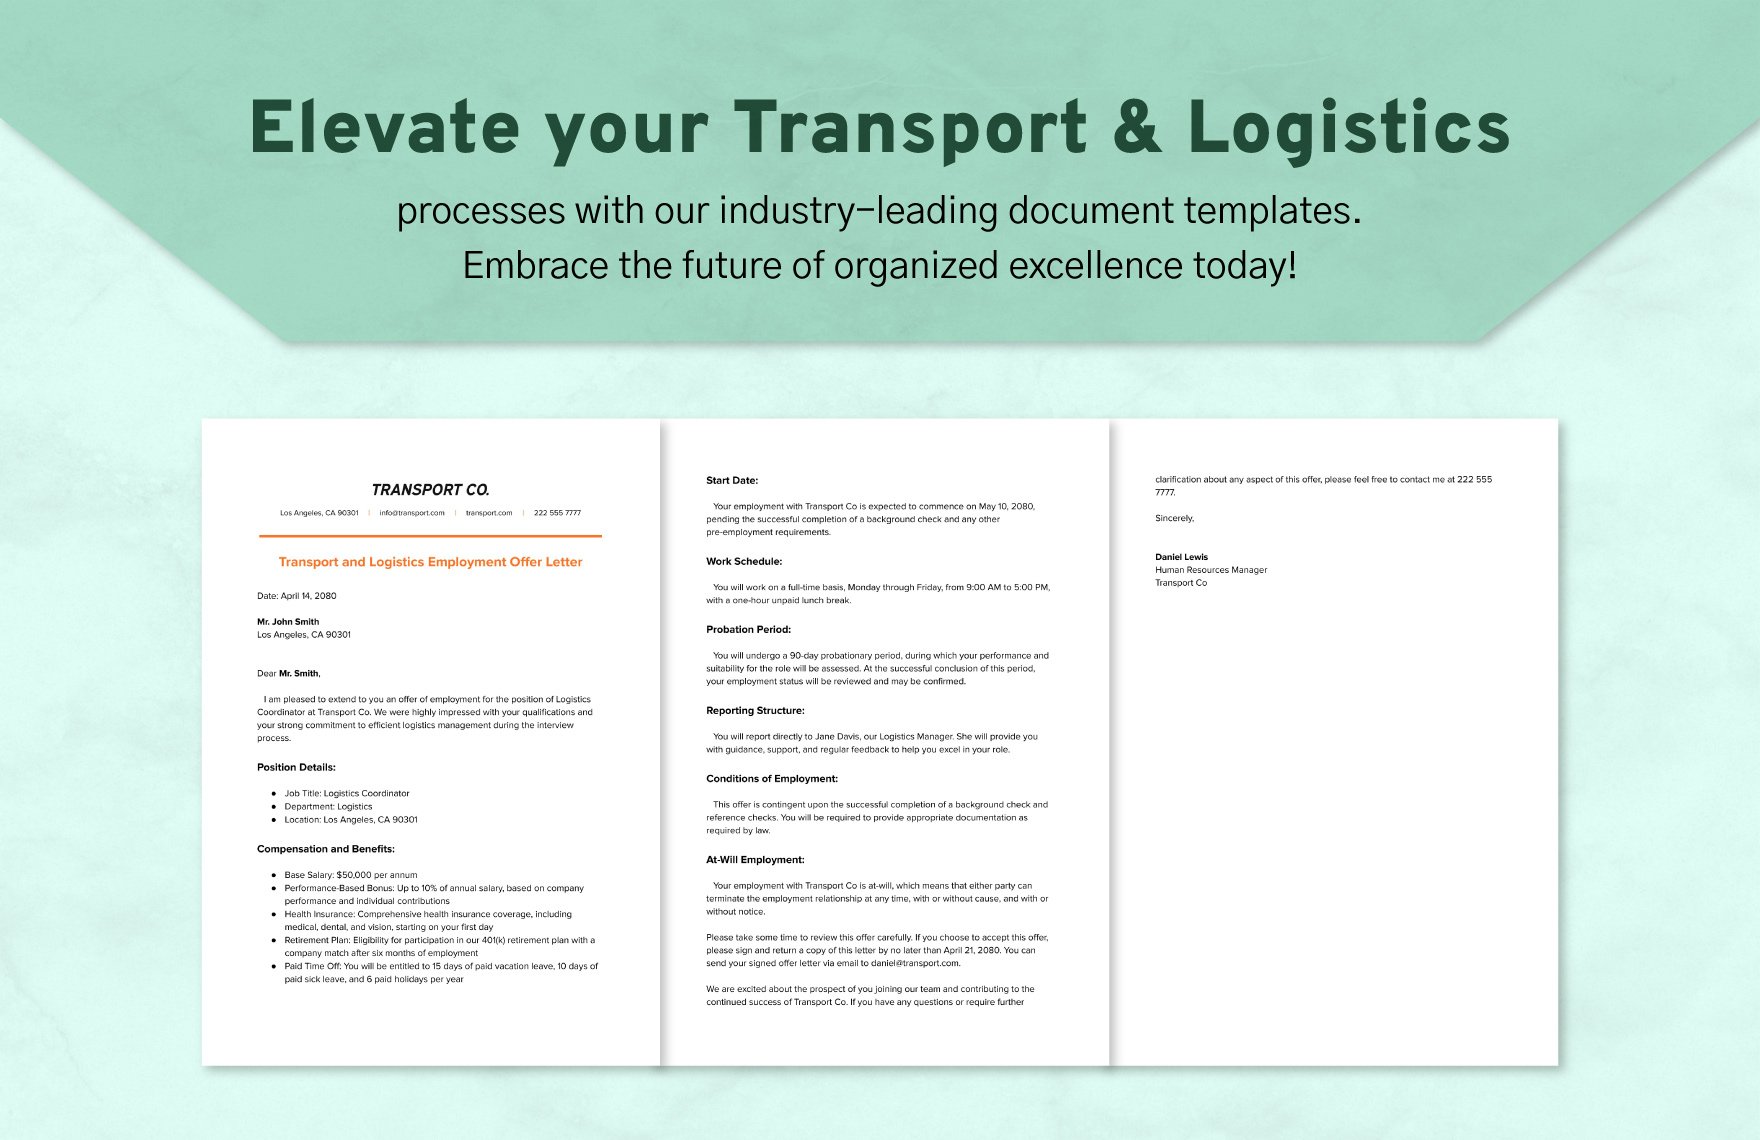 Transport and Logistics Employment Offer Letter Template